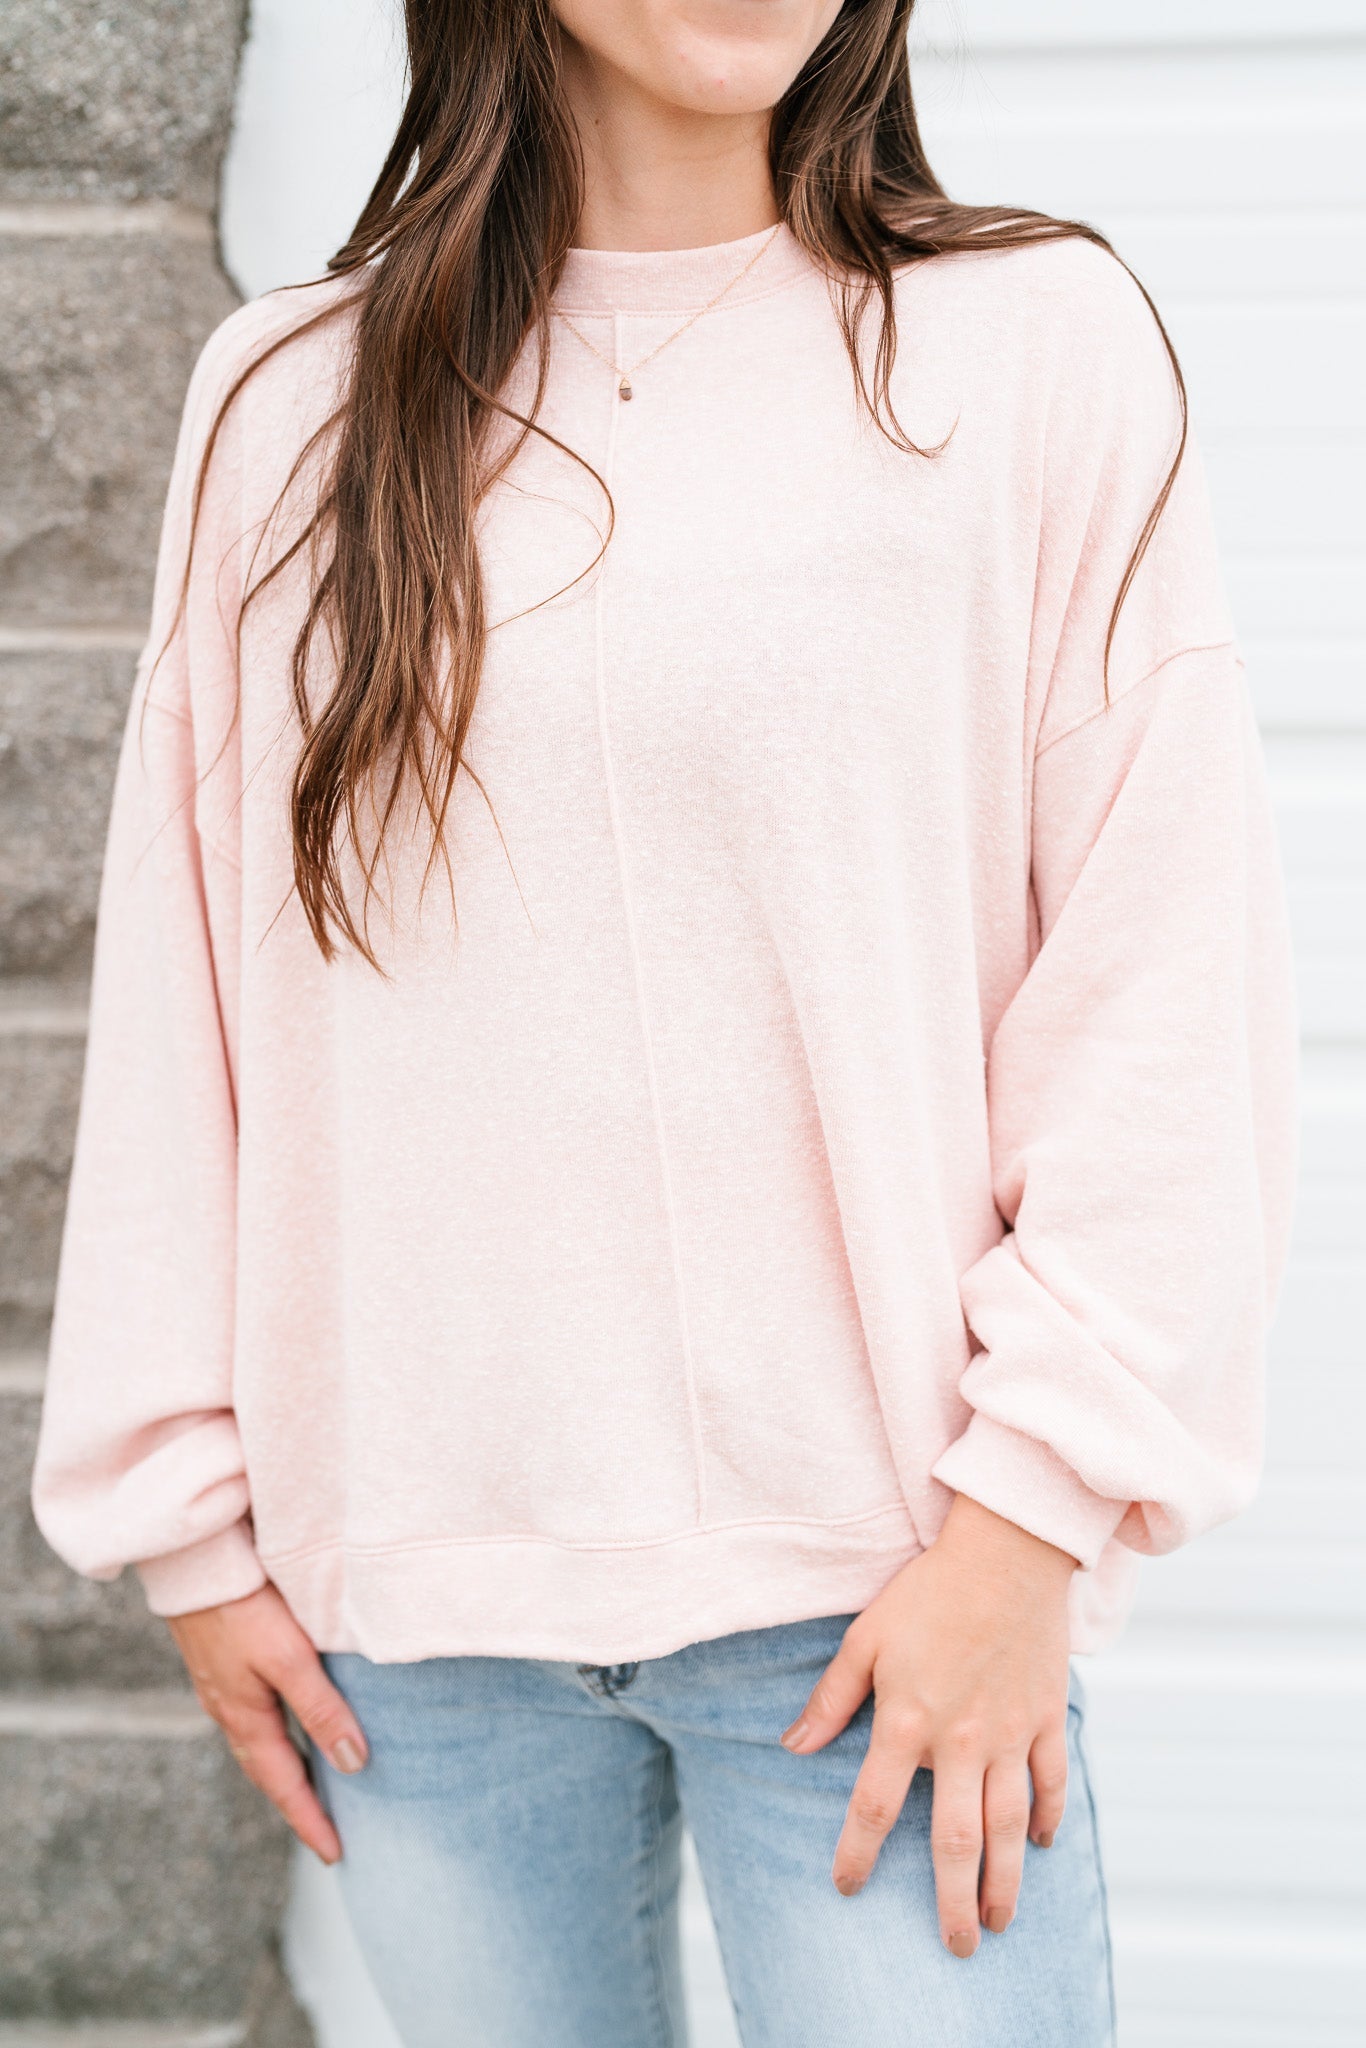 The Lazy Day Lounge Sweater